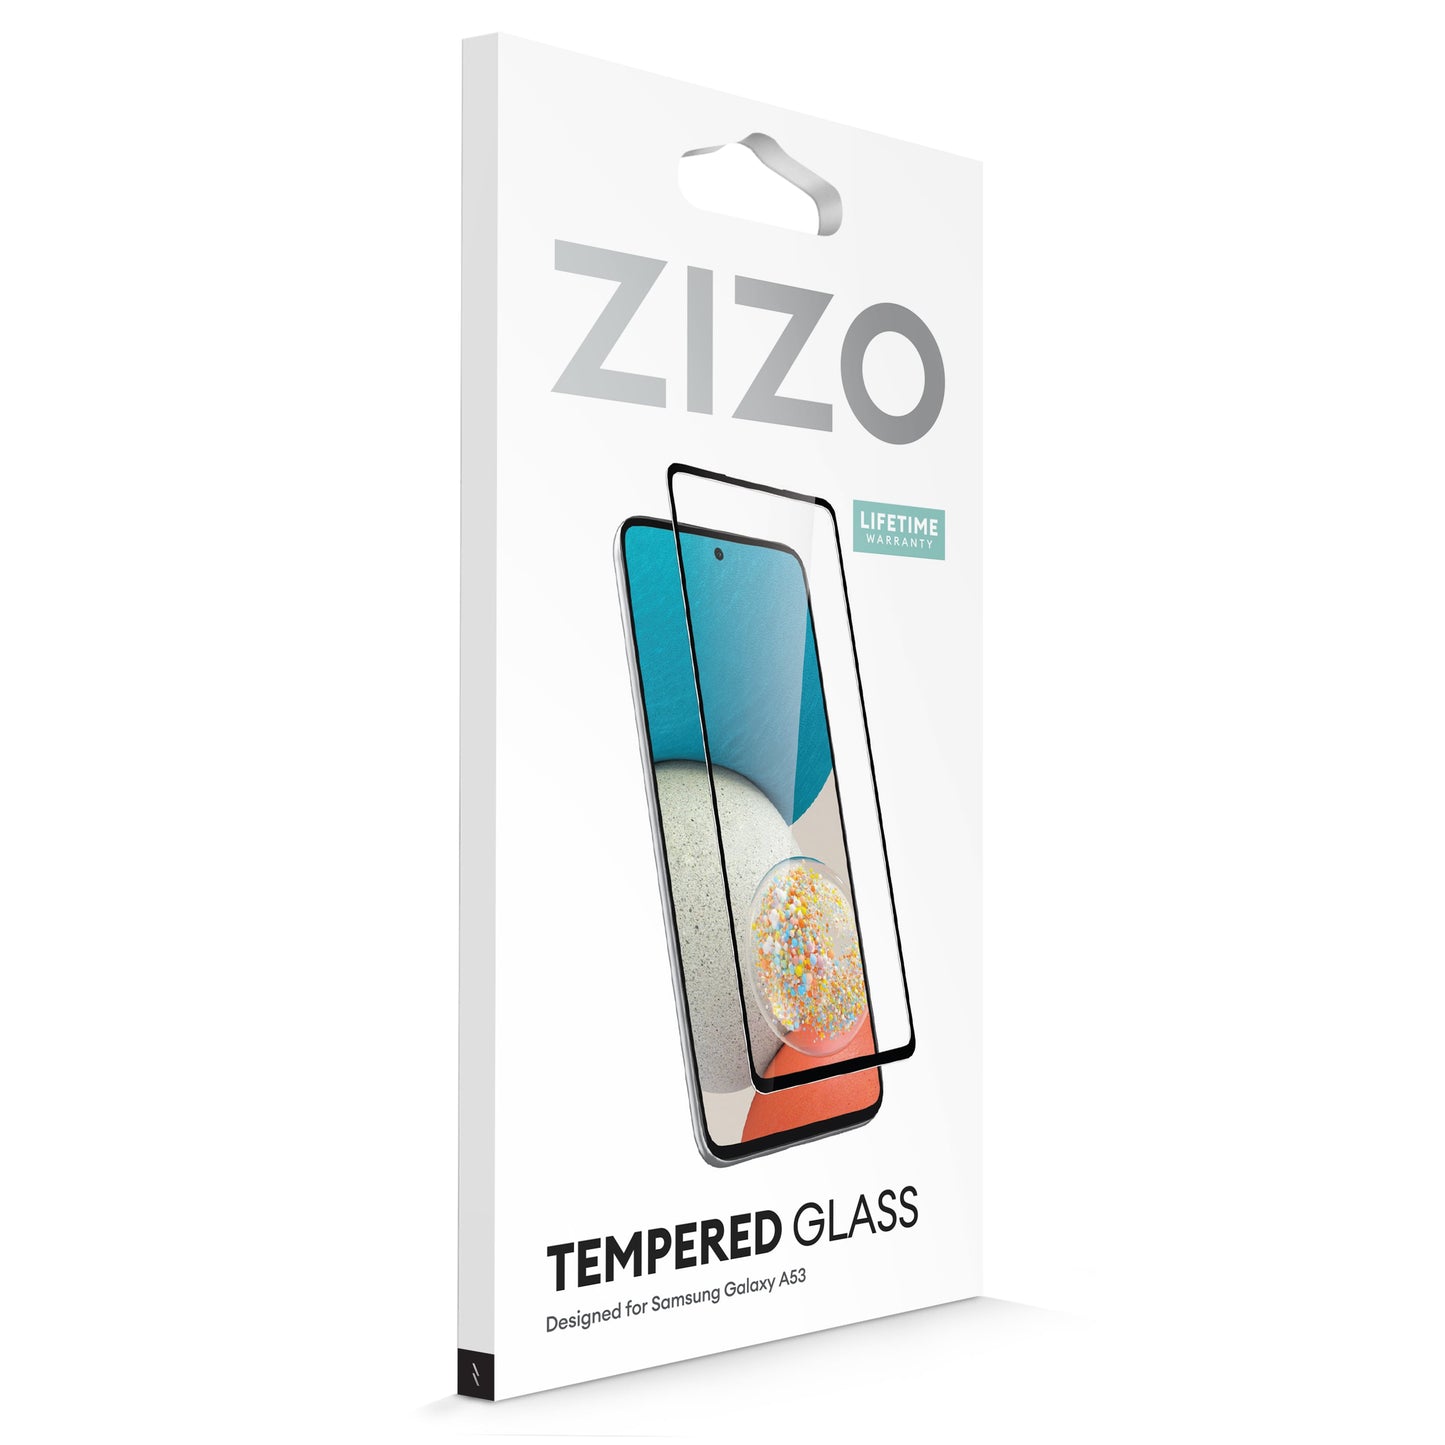 ZIZO TEMPERED GLASS Screen Protector for Galaxy A53 5G